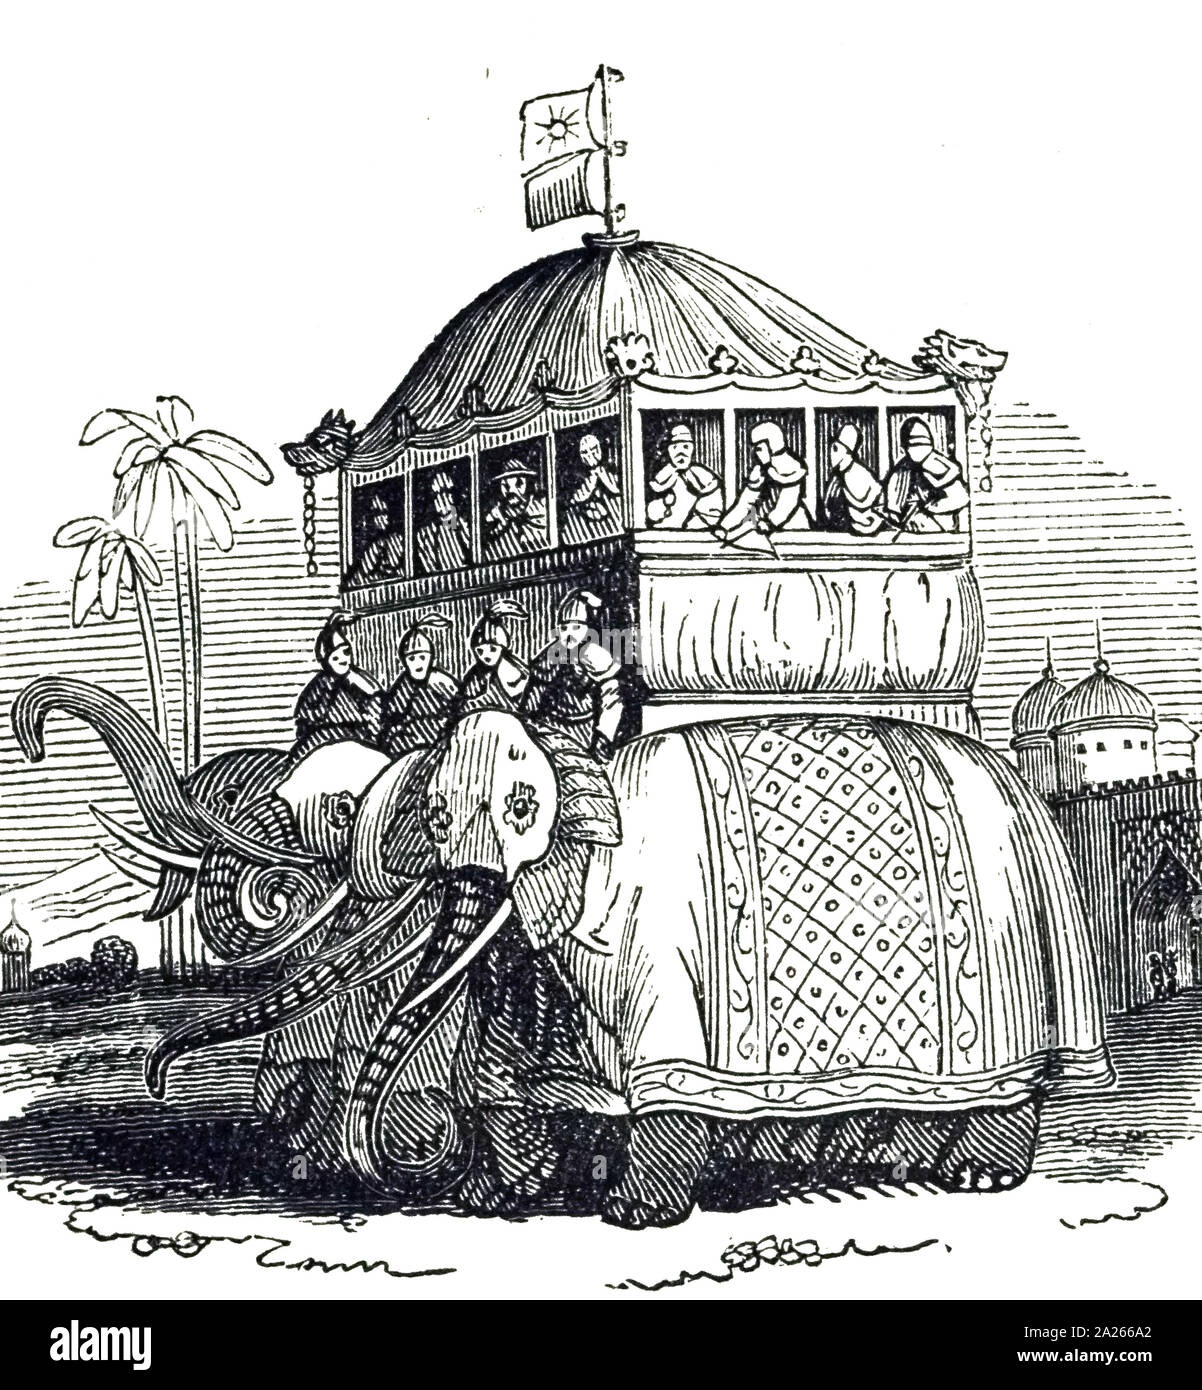 An engraving depicting a Tartar palanquin, carrying warriors on the backs of elephants. Dated 19th Century Stock Photo